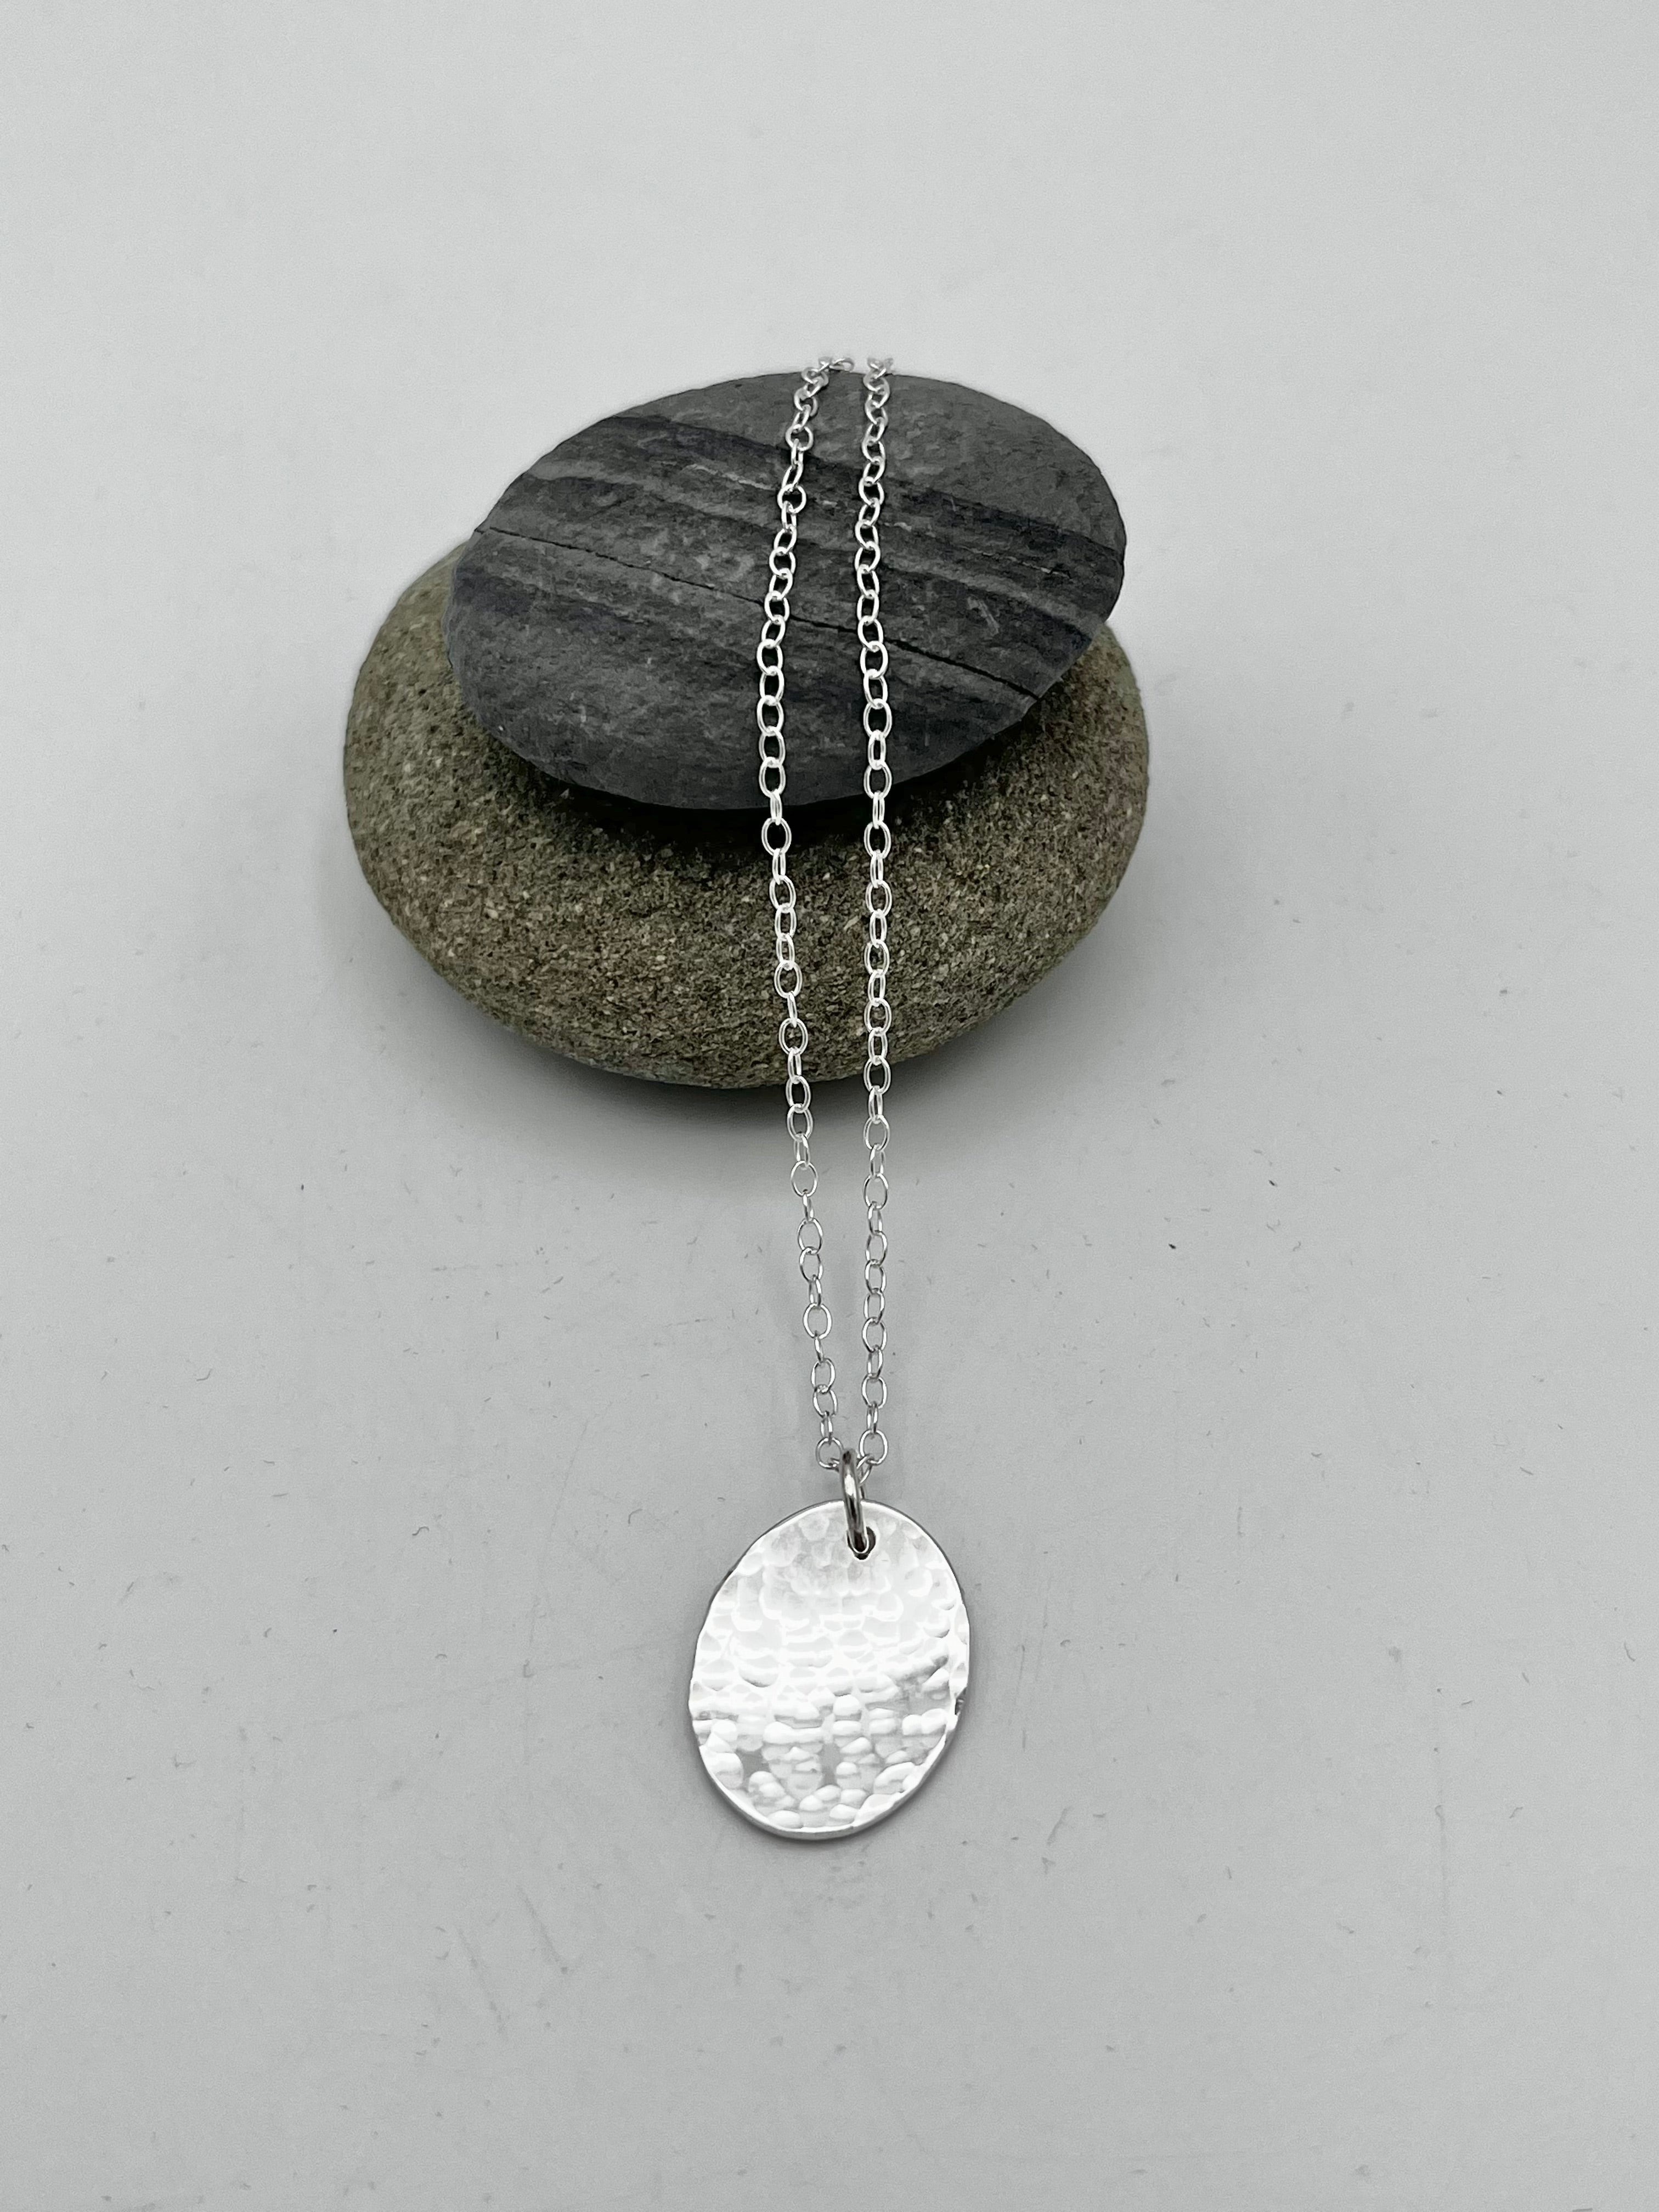 Oval disc pendant 20mm long hammered finish on 16" chain